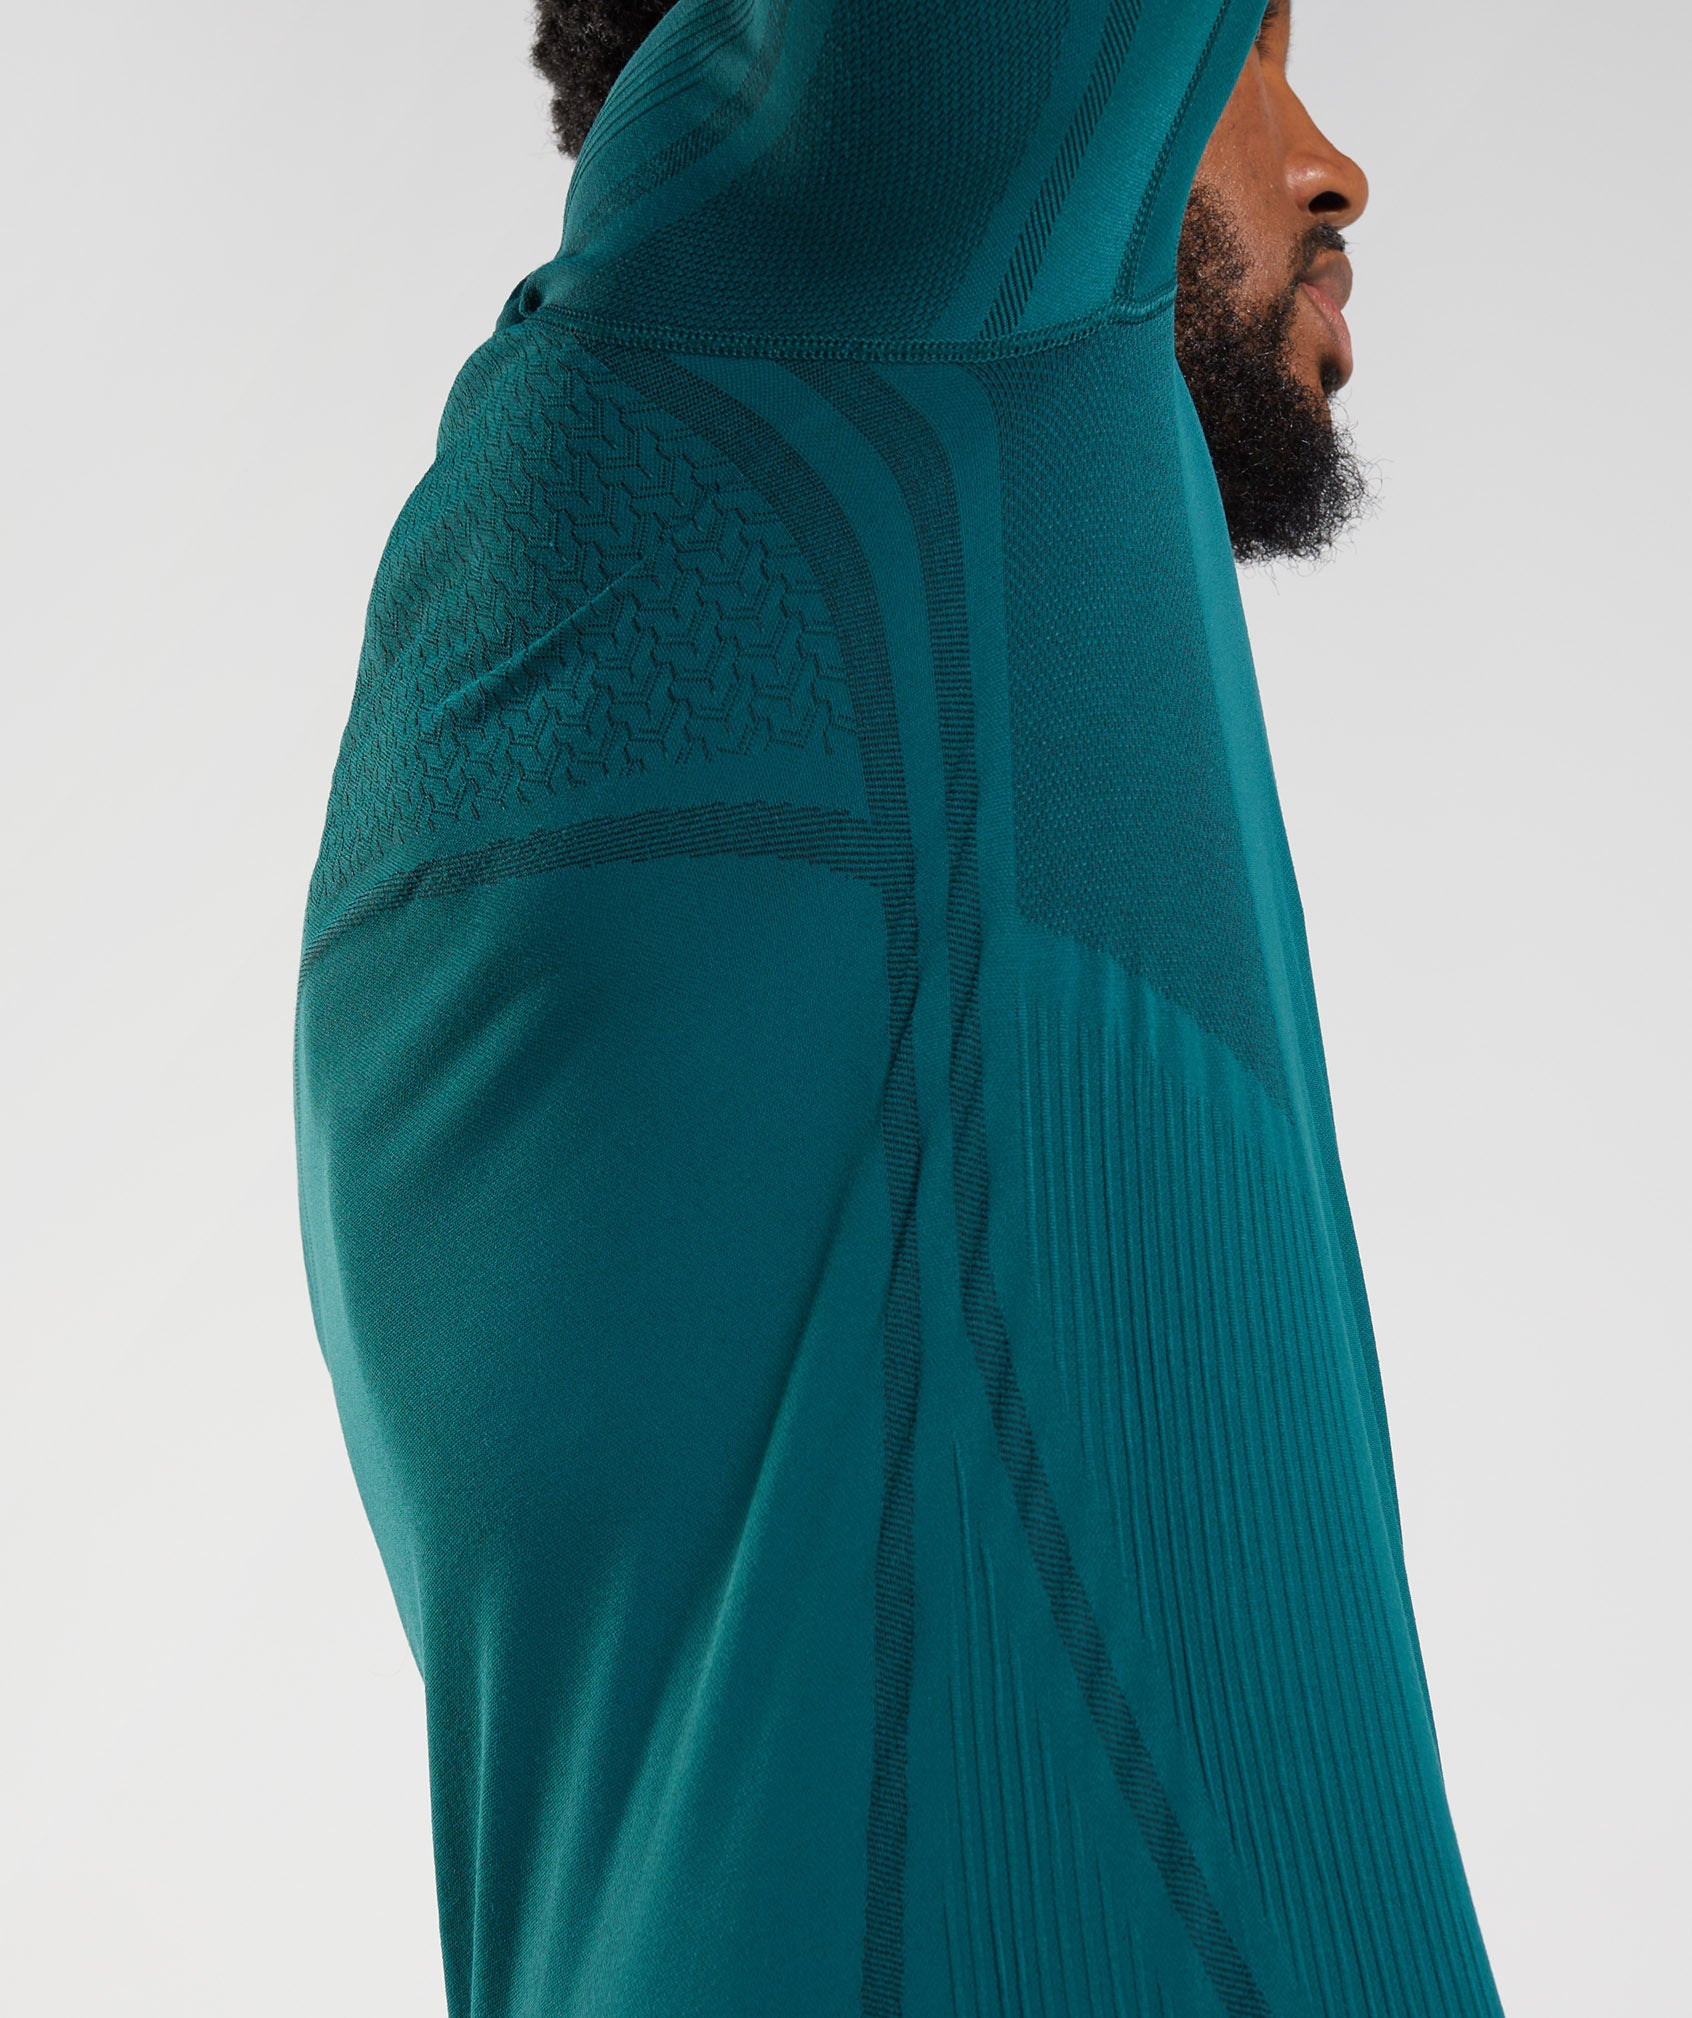 315 LS Seamless T-Shirt in Winter Teal/Black - view 3